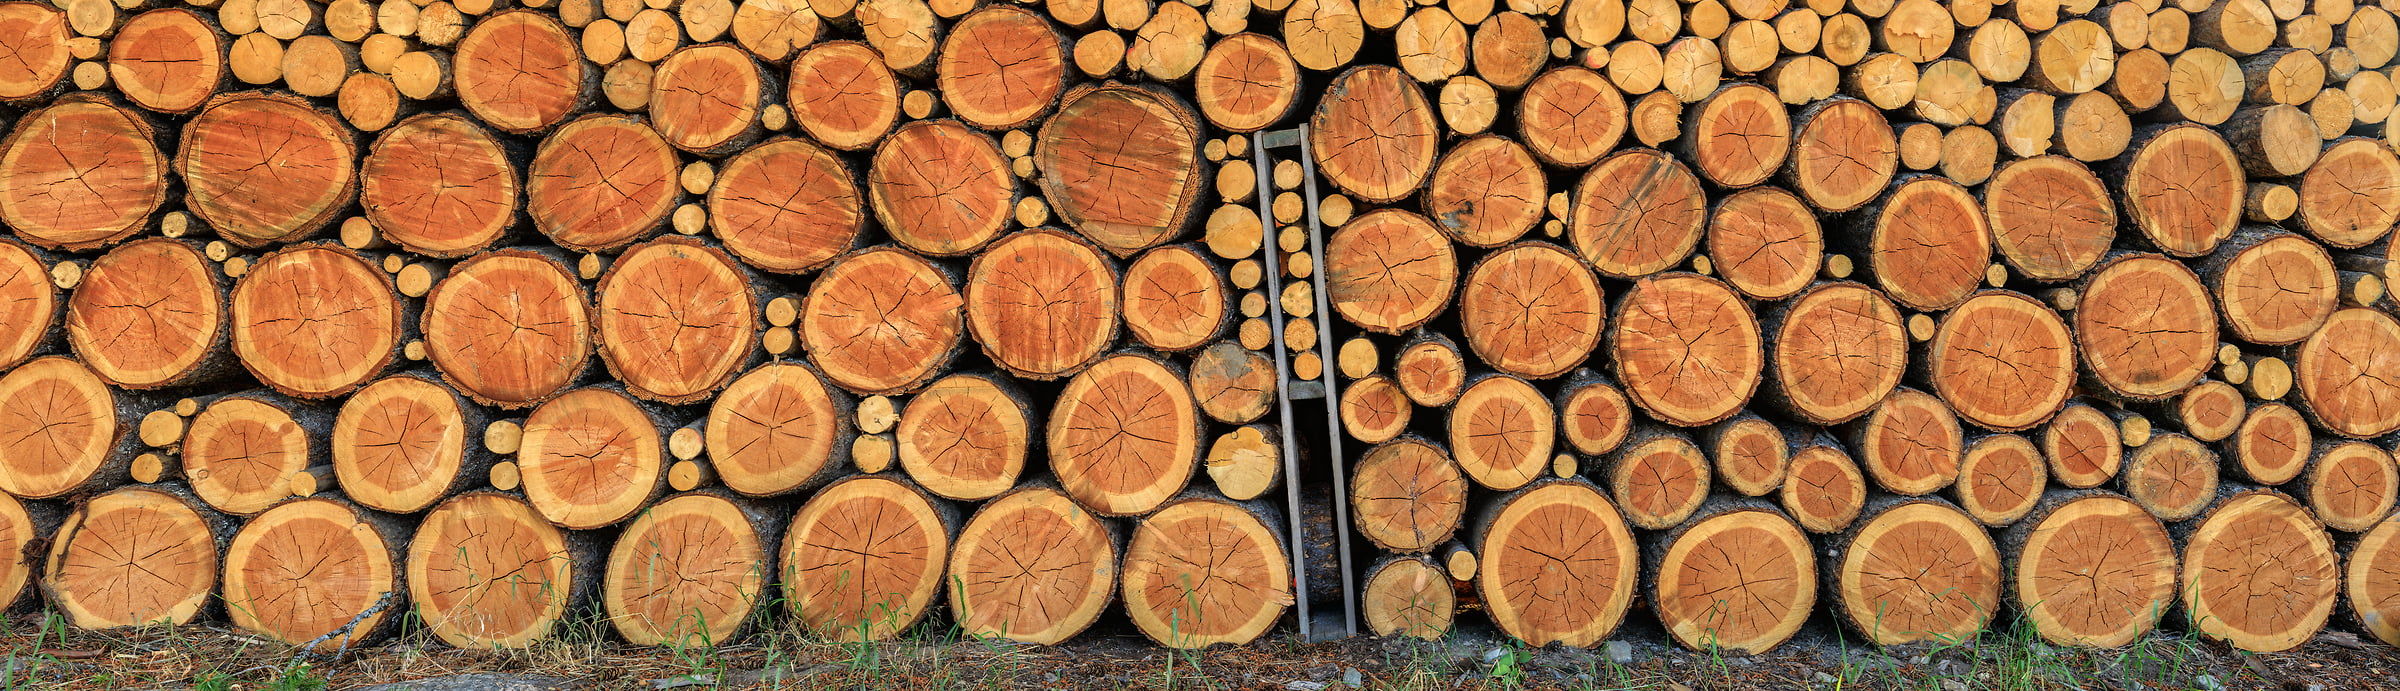 1,128 megapixels! A very high resolution, large-format VAST photo of cut wood stacked in a pile; outdoor textures photograph created by Scott Dimond in Eureka, Montana.